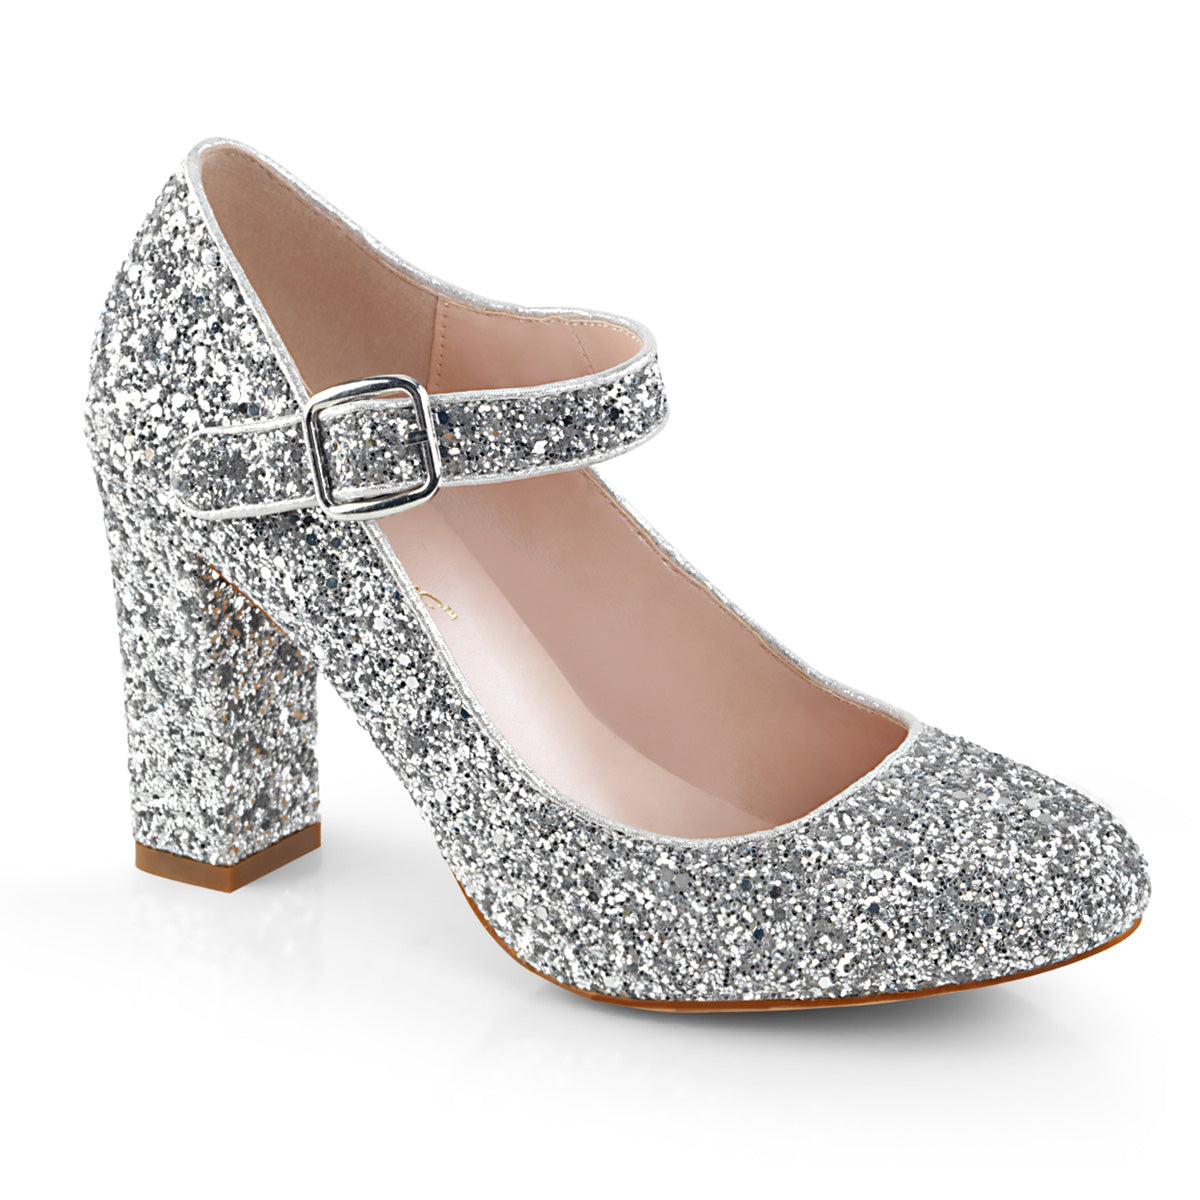 SABRINA-07 Fabulicious 4 Inch Heel Silver Glitter Sexy Shoes